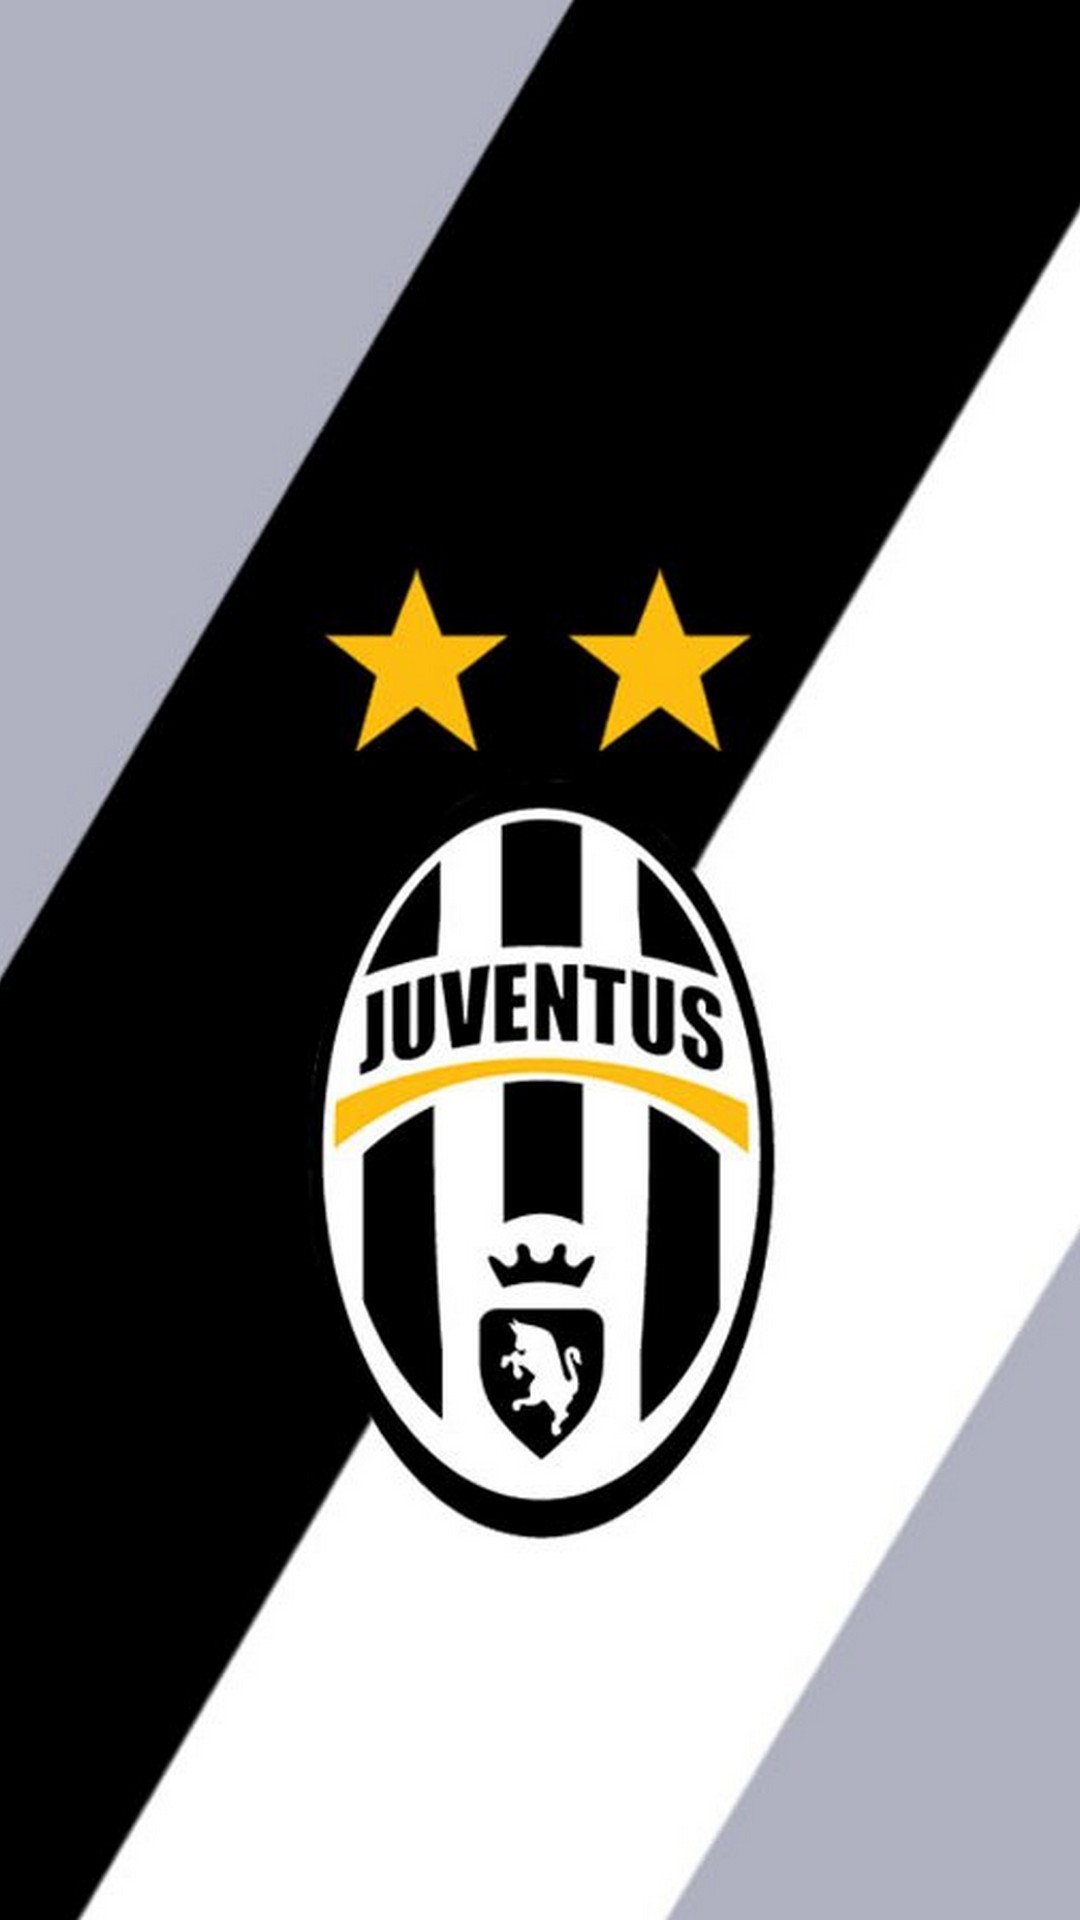 Juventus Android Wallpaper resolution 1080x1920